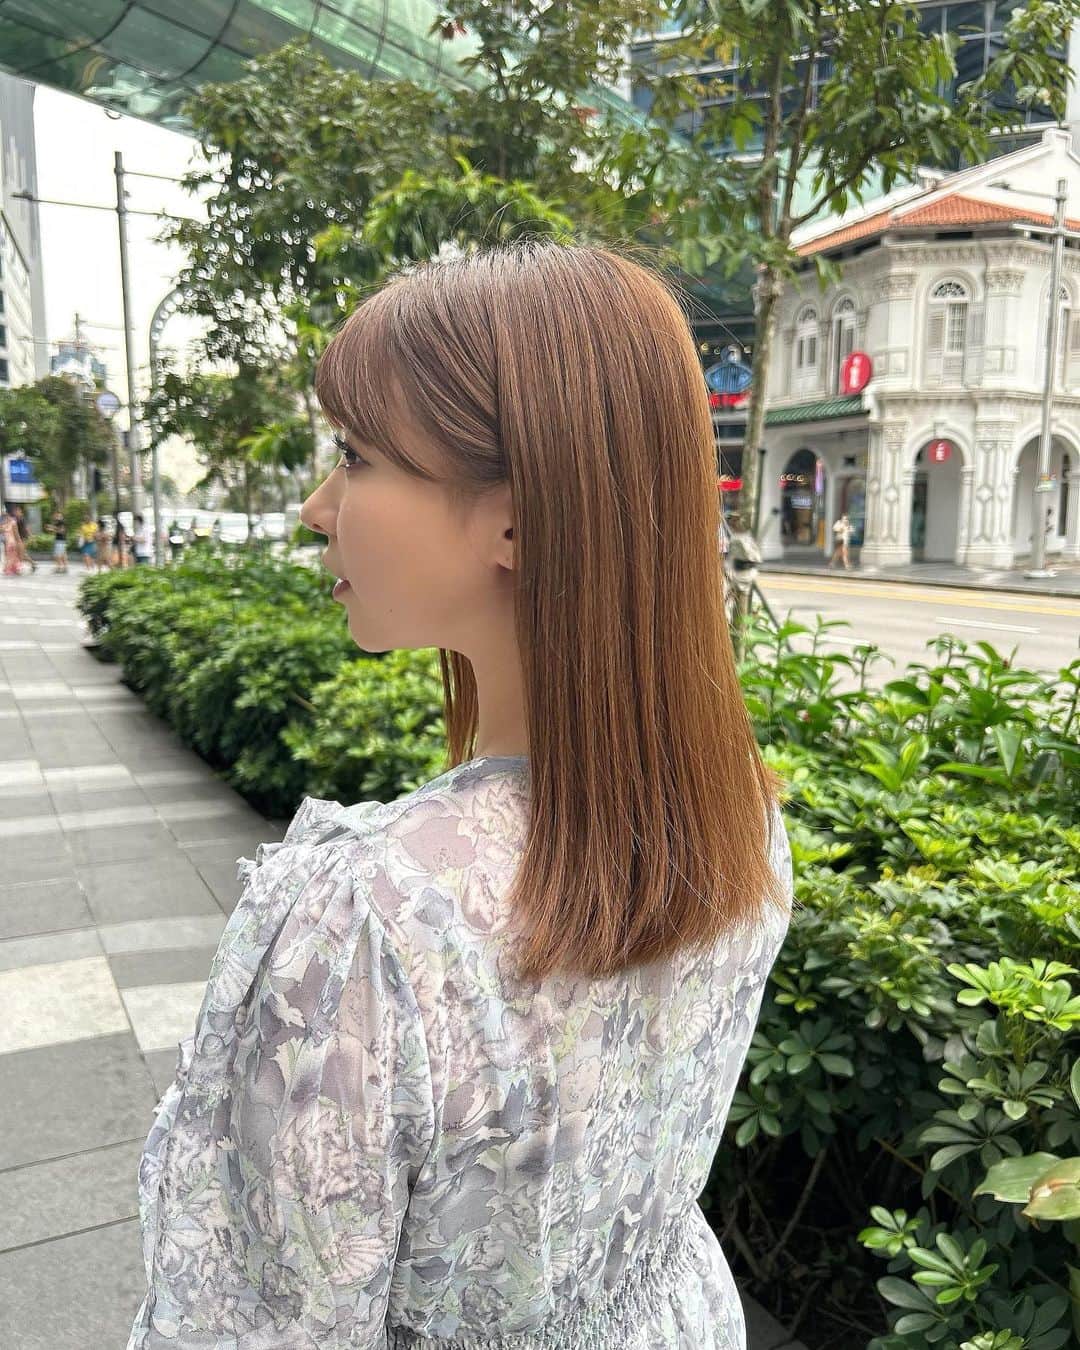 橘まりやさんのインスタグラム写真 - (橘まりやInstagram)「You’ll get a  30% for cut, color, and the incalami treatment so please to send DM @narissam.4 to make a reservation! Then please tell to her, you saw Mariya's Instagram.   I went to hair salon” @ruler.singapore “ to maintenance my hair 💇‍♀️✨ By @narissam.4 🤍 He's very skilled and always sets my hair to my ideal style♡  My recommendation is Features of TOKIO Incarami treatment.  The patented technology restores hair, so it is effective for colored, permed, and damaged hair. The treatment lasts longer than other treatments. Hair becomes shiny and manageable. It protects your hair from heat and dryness and makes your hair color last longer.  シンガポールでいつも行っている美容院” @ruler.singapore “にいってきましたー✨  まりのInstagramを見たと伝えたら、カット、カラー、インカラミトリートメントのセットで30%OFFになるから、是非 @narissam.4 にDMしてみてね😉🎶  まりの担当の @narissam.4 さんは韓国で働いていた経験もあって、女の子を可愛くする天才😍✨ 今回まりがやってもらったTOKIOのインカラミトリートメントがめっちゃおすすめ✨ 特許技術で髪を修復するので、カラーリングやパーマ、ダメージヘアにも効果的🥰 他のトリートメントに比べて、持続性があるし、髪がツヤツヤになって、まとまりやすくなるんだって✨ 熱や乾燥から髪を守って、ヘアカラーを長持ちさせることができるところが一番の魅力😌❤️ 是非みんな試してみてね🥰  #rulersingapore  #hairsalonsg  #singaporelife #singapore #singaporegirl #singaporeinsta #シンガポール在住 #シンガポールライフ #シンガポールおすすめ #シンガポール留学 #シンガポール情報 #シンガポール美女 #シンガポール #シンガポール生活 #橘まりや #グラビア #グラドル  #pinupgirl #pinupmodel #bikinimodel  #sexy #japanesegirl #idol #그라비아  #아이돌 #followｍe #偶像 #寫真偶像」11月1日 22時36分 - mariya_tachibana_official